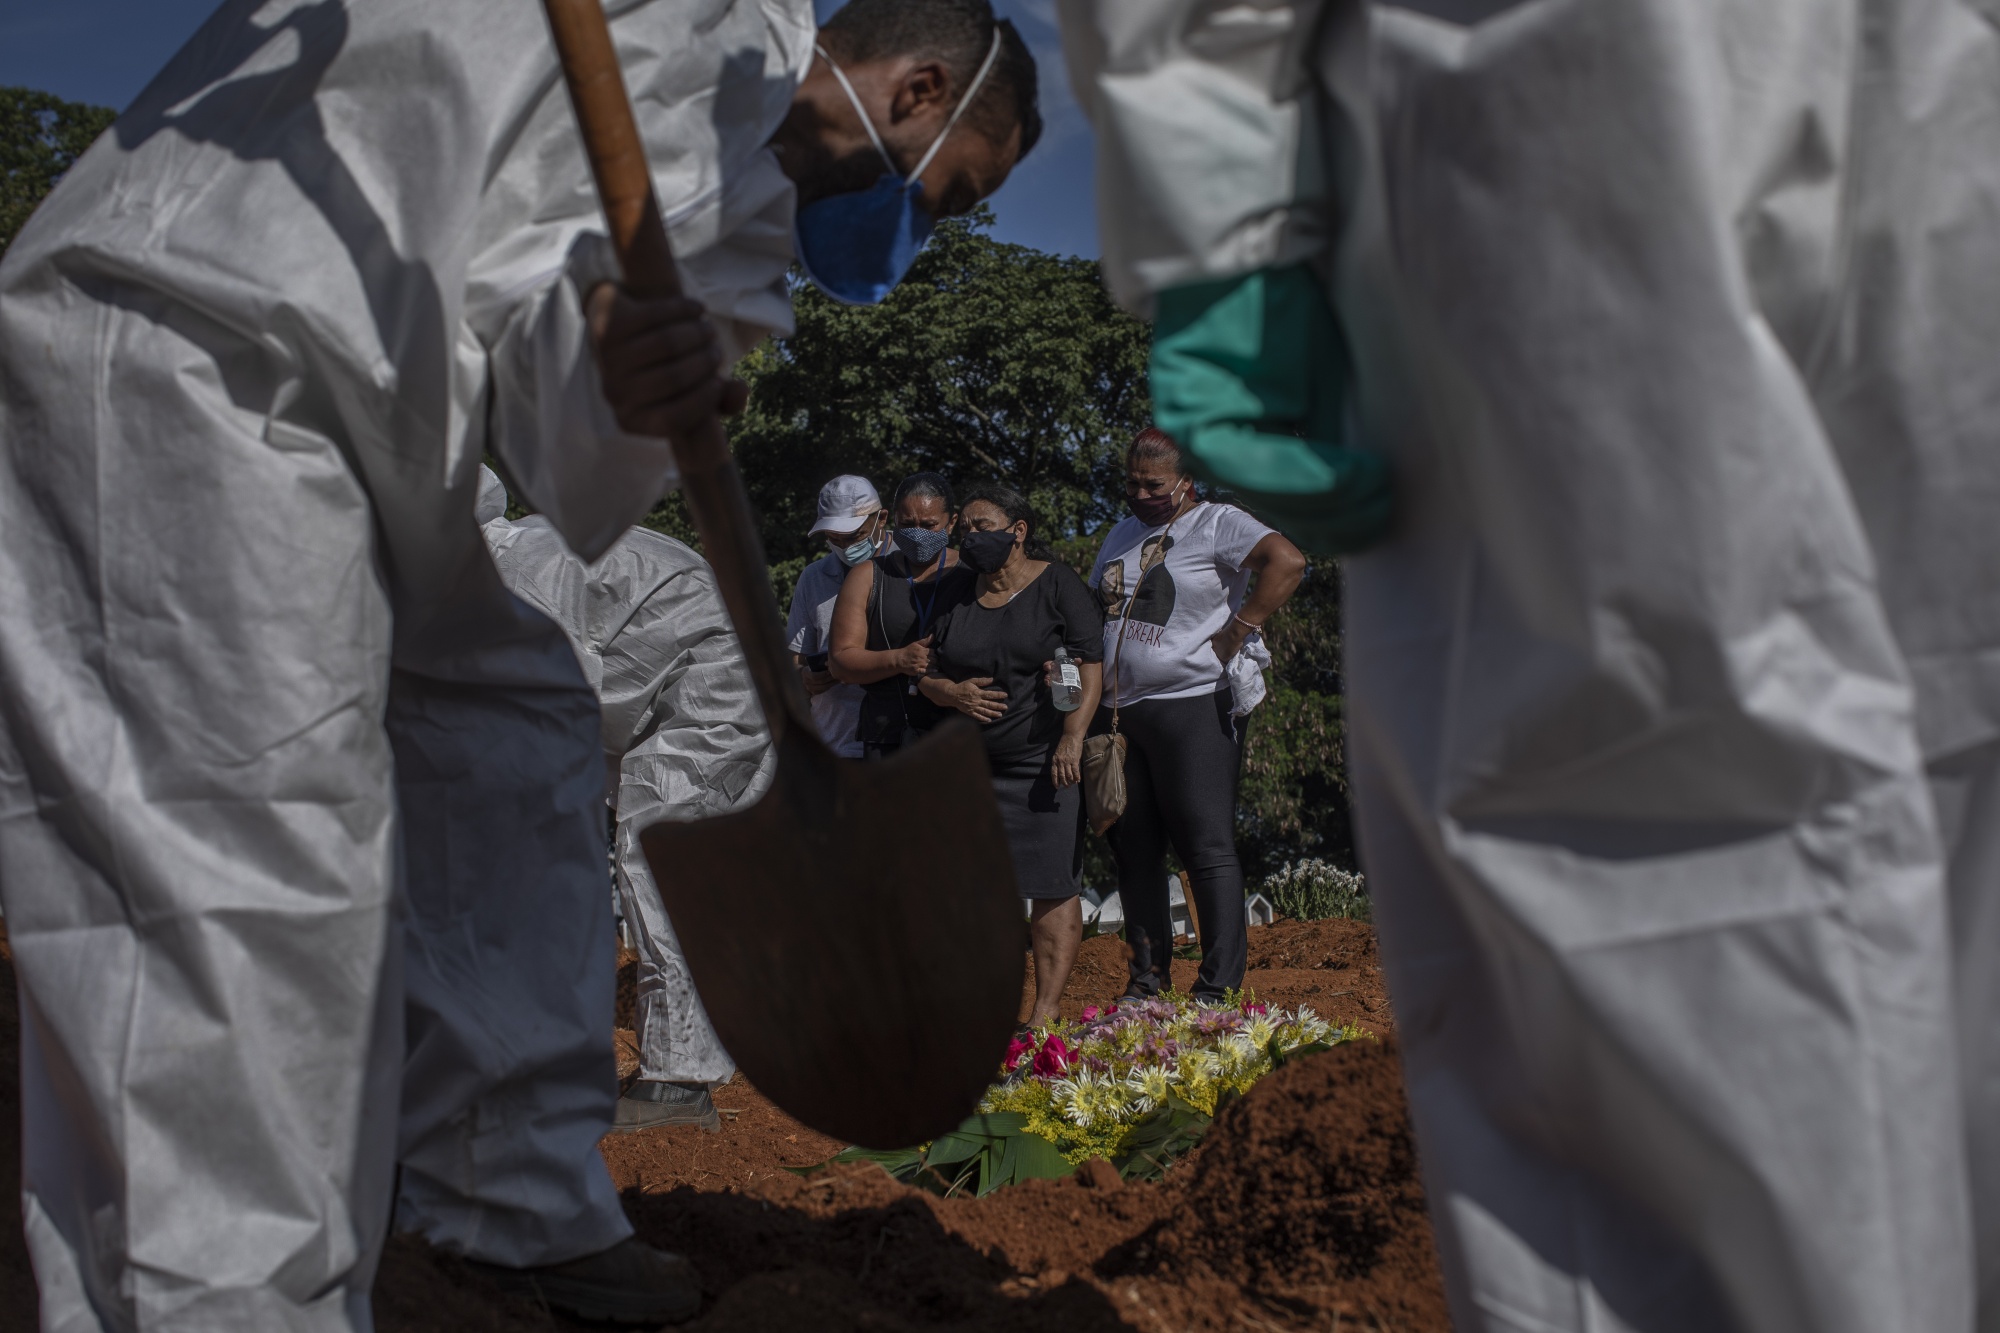 Mourners watch as workers wearing protective equipment bury the casket of a Covid-19 victim at the Vila Formosa cemetery in Sao Paulo, Brazil, on&nbsp;March 24.